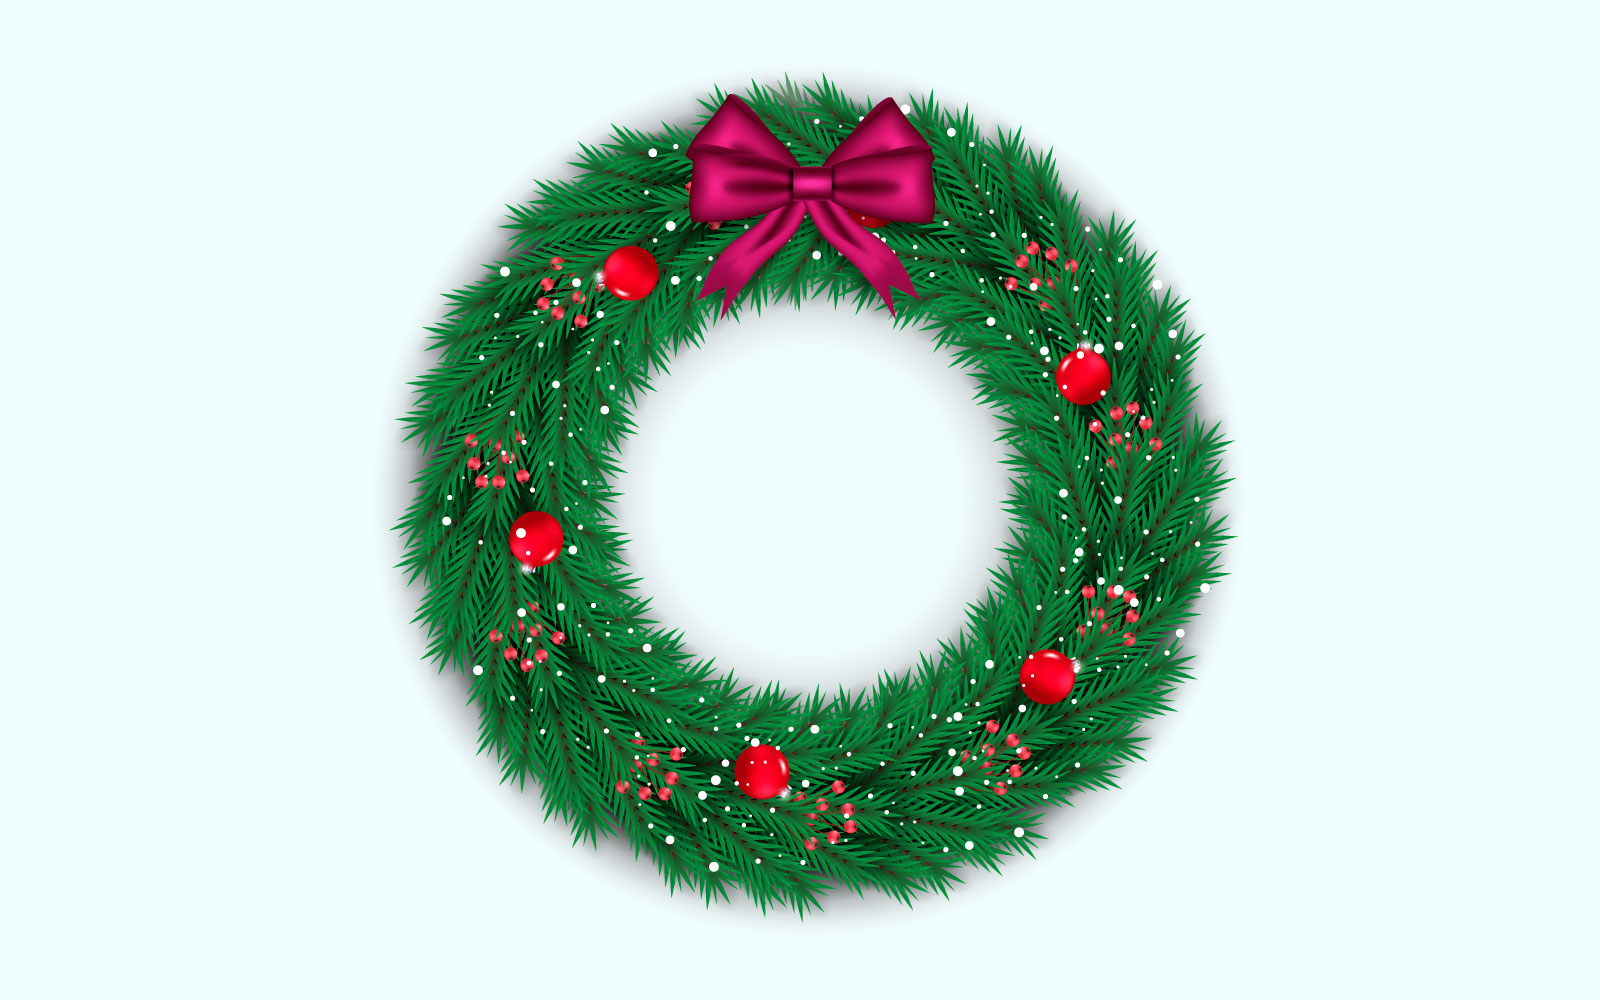 Christmas wreath vector concept design. merry christmas text in pine wreath element with leaves